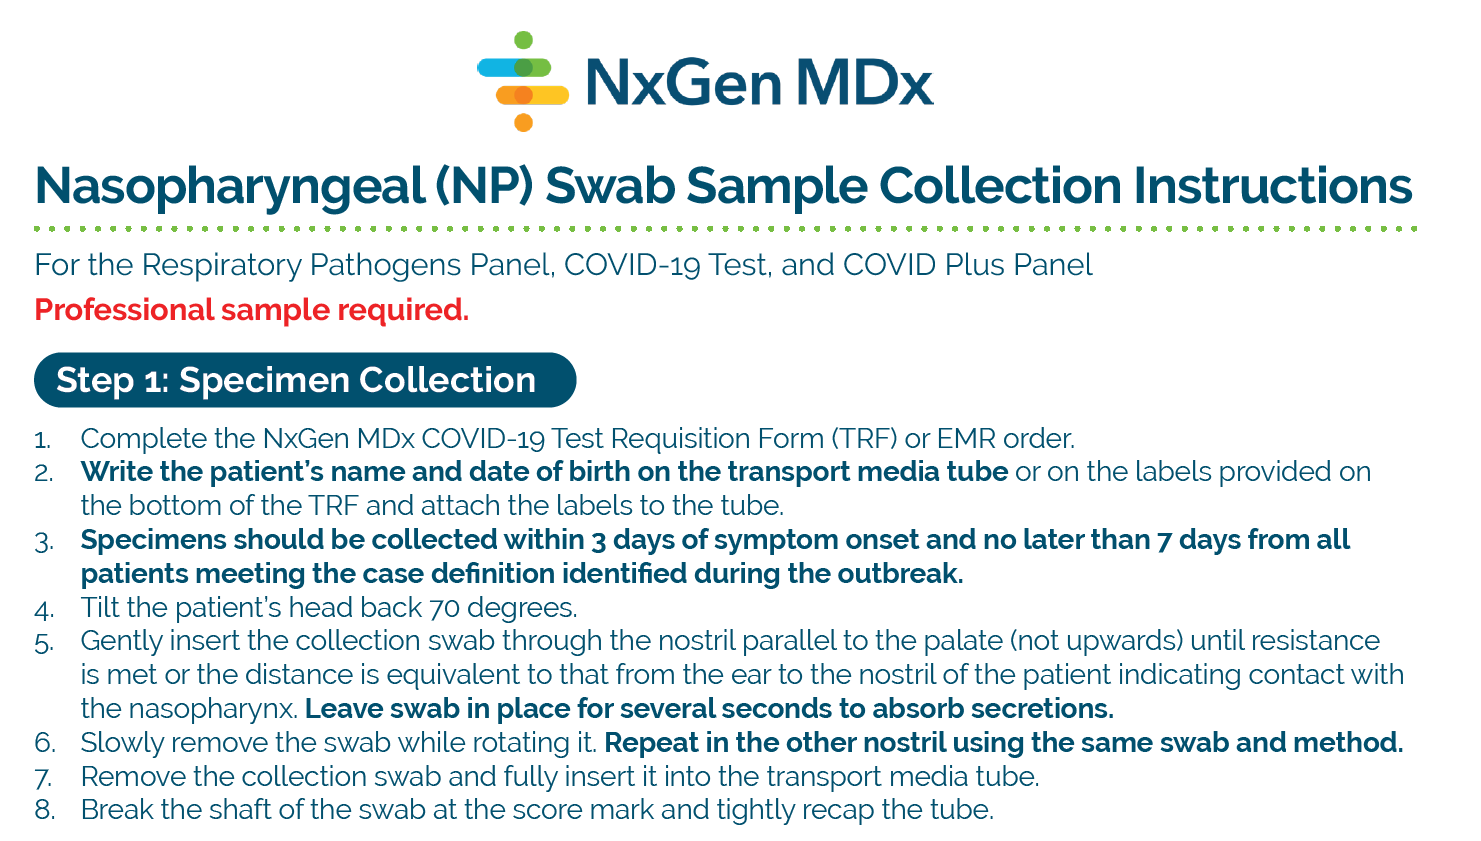  Link to Nasopharyngeal Swab Collection Instructions PDF